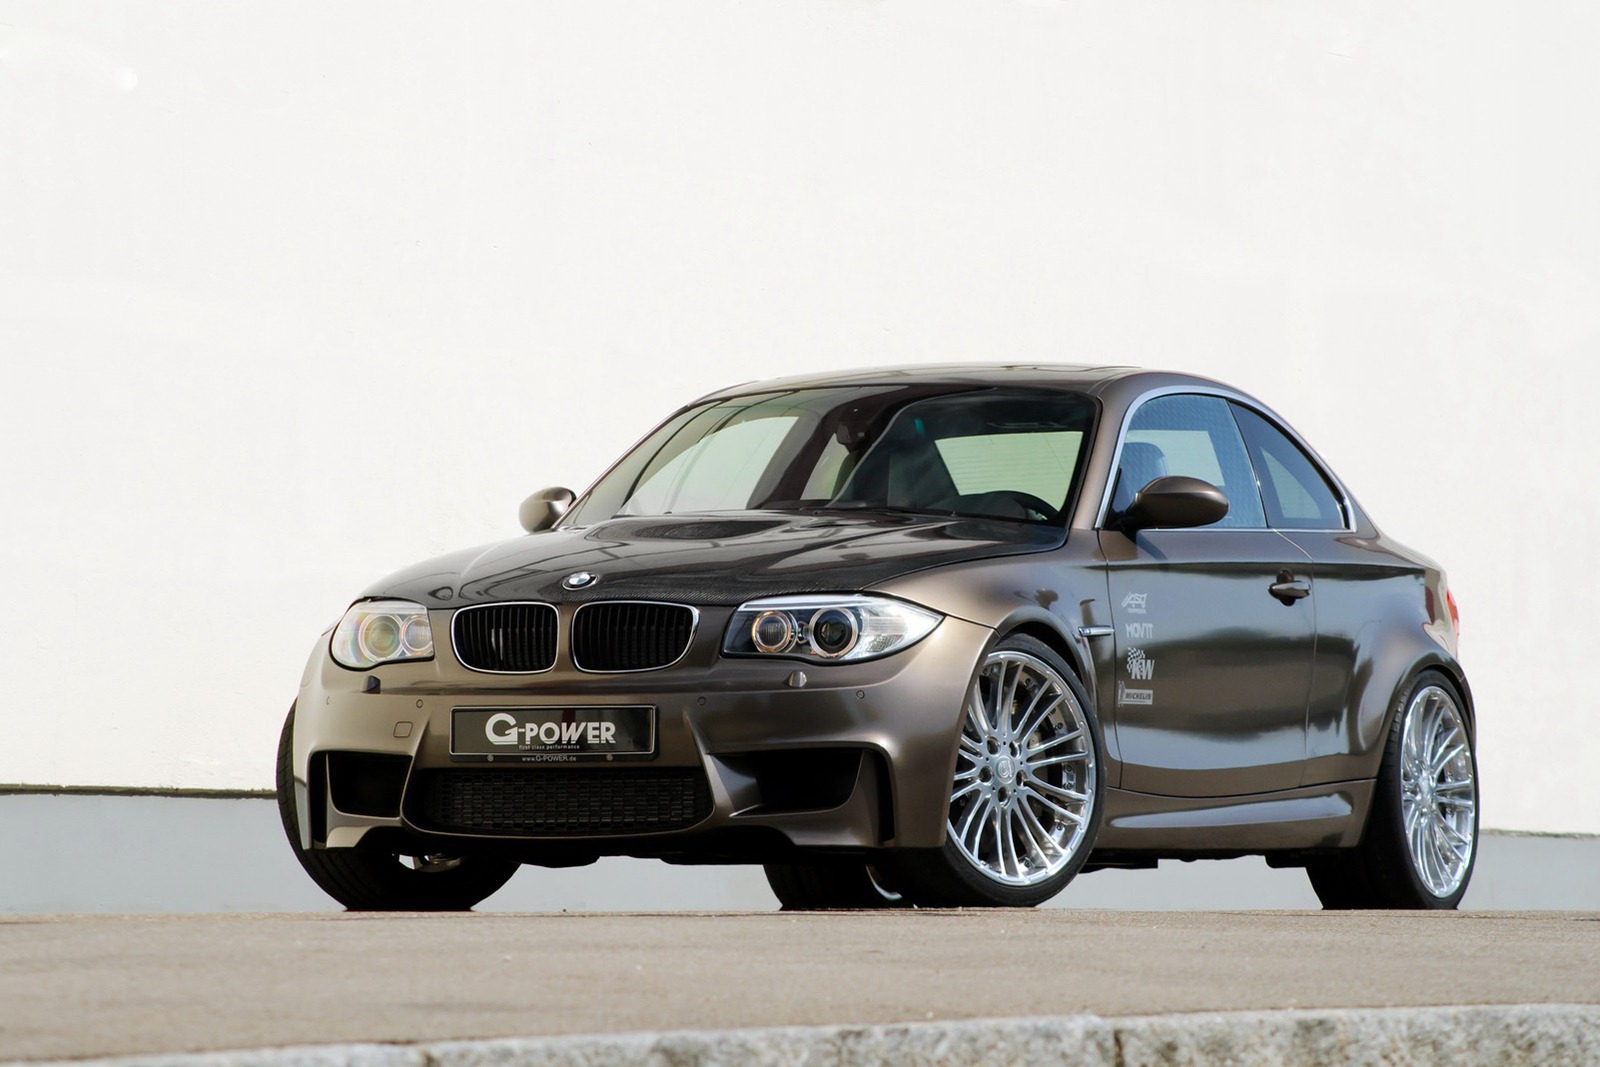 G-Power G1 V8 BMW 1 Series M Coupe